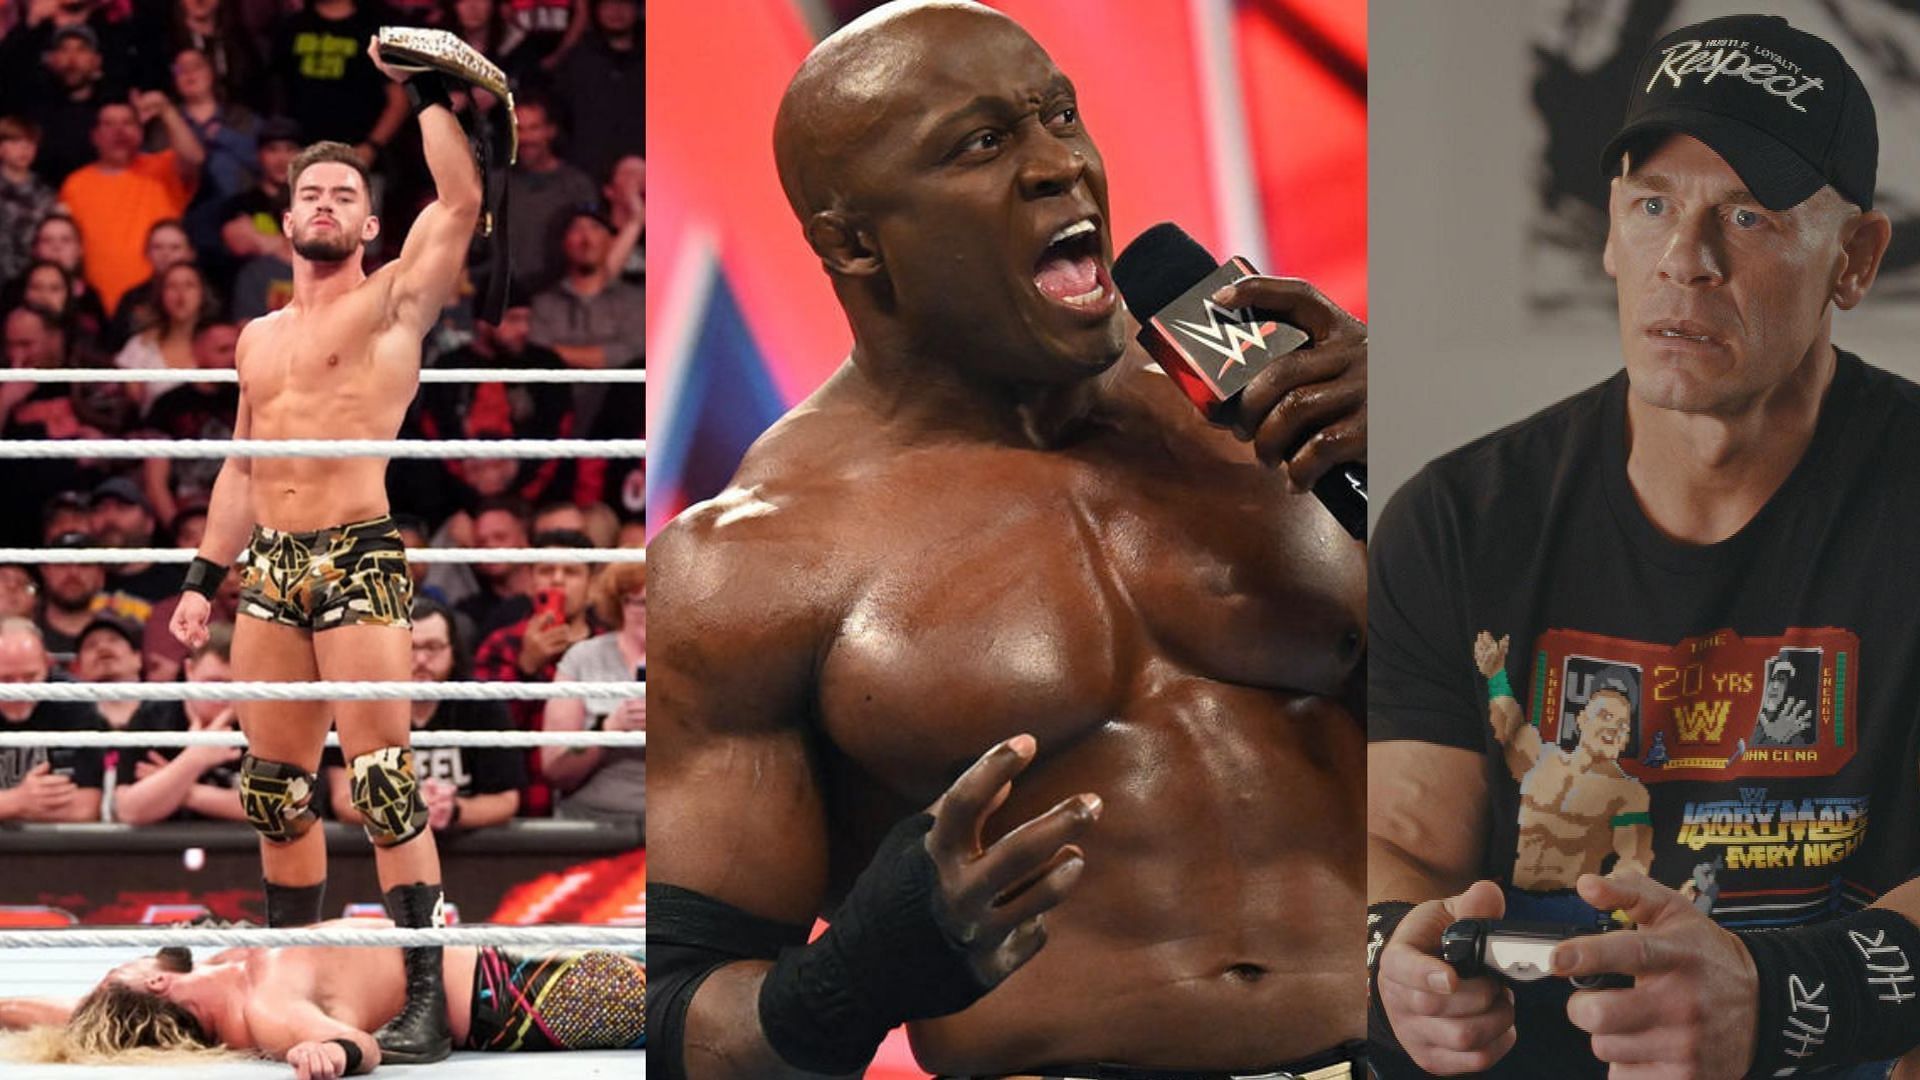 Who will wrestle for the US Championship at WrestleMania?